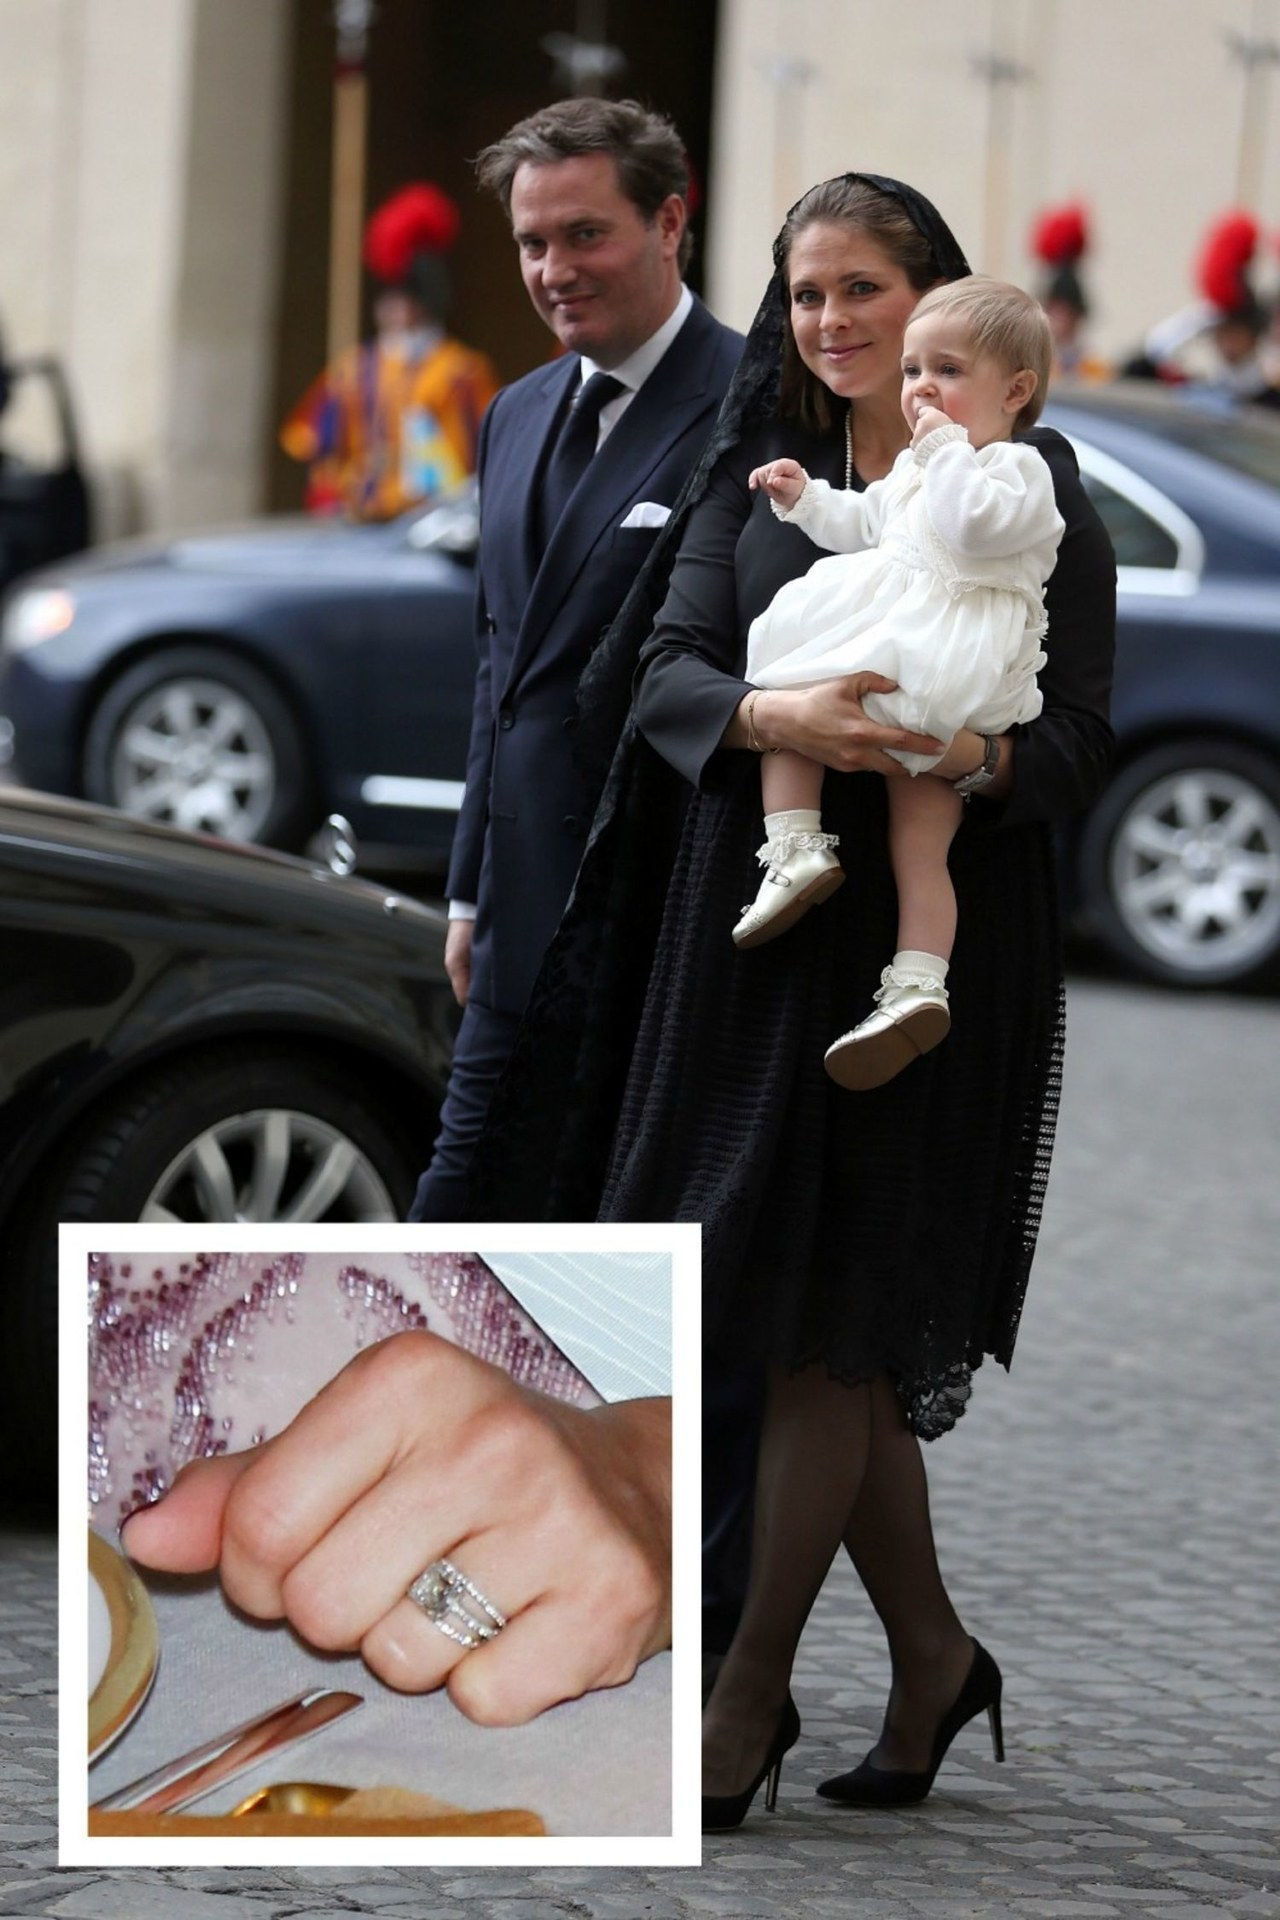 2 princess madeline engagement ring prince carl christopher oneill royal wedding sweden 0517 getty